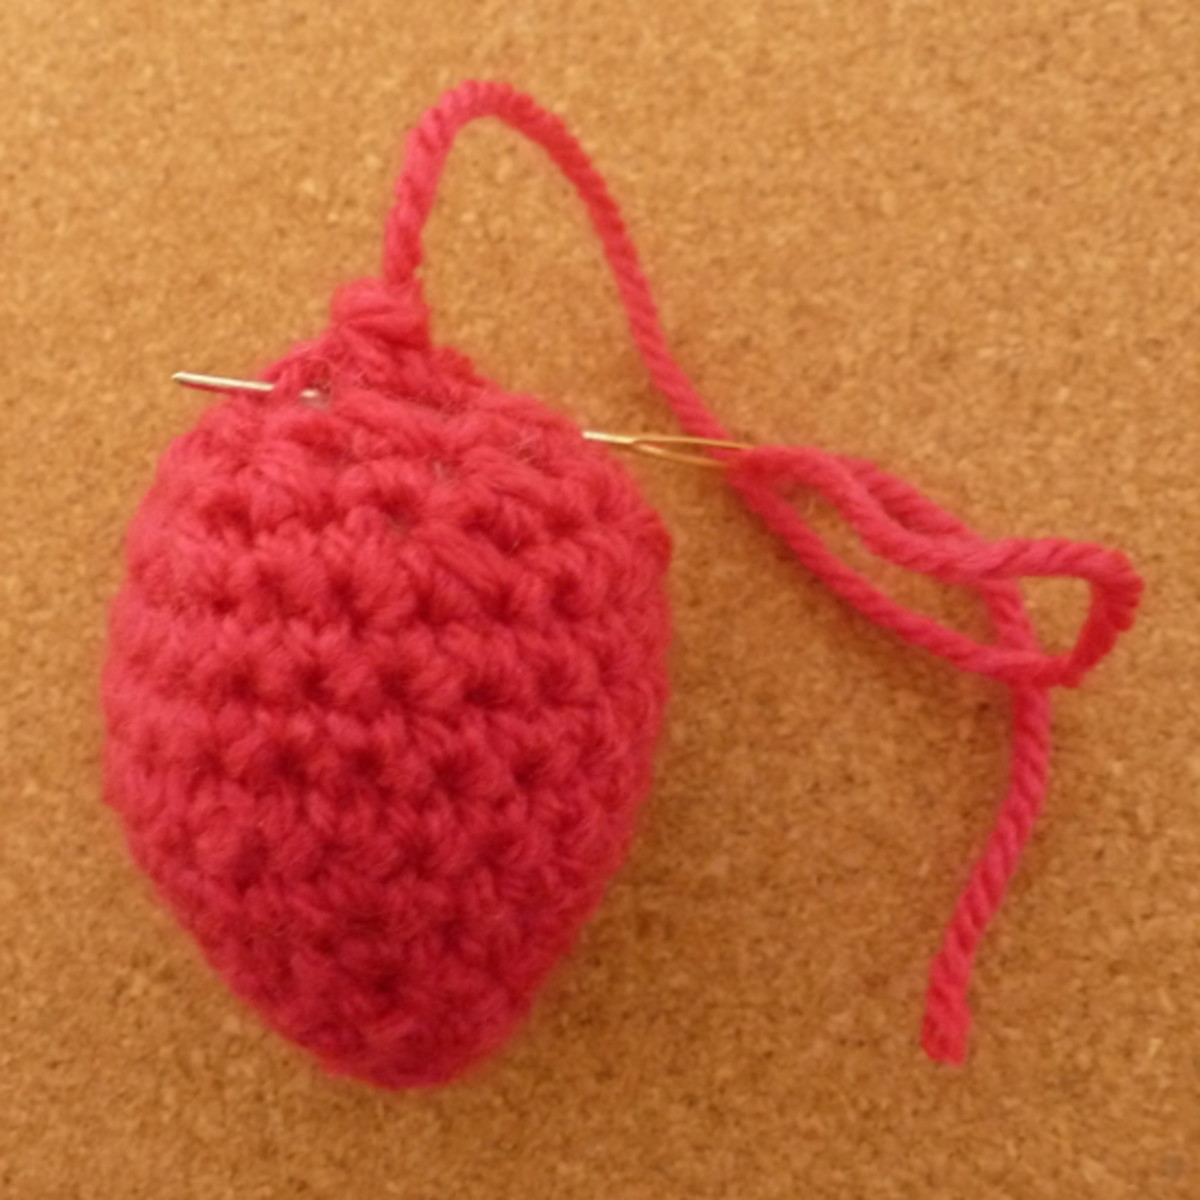 Leave enough thread so that you can sew in the thread to the top of your mini strawberry fruit plush.